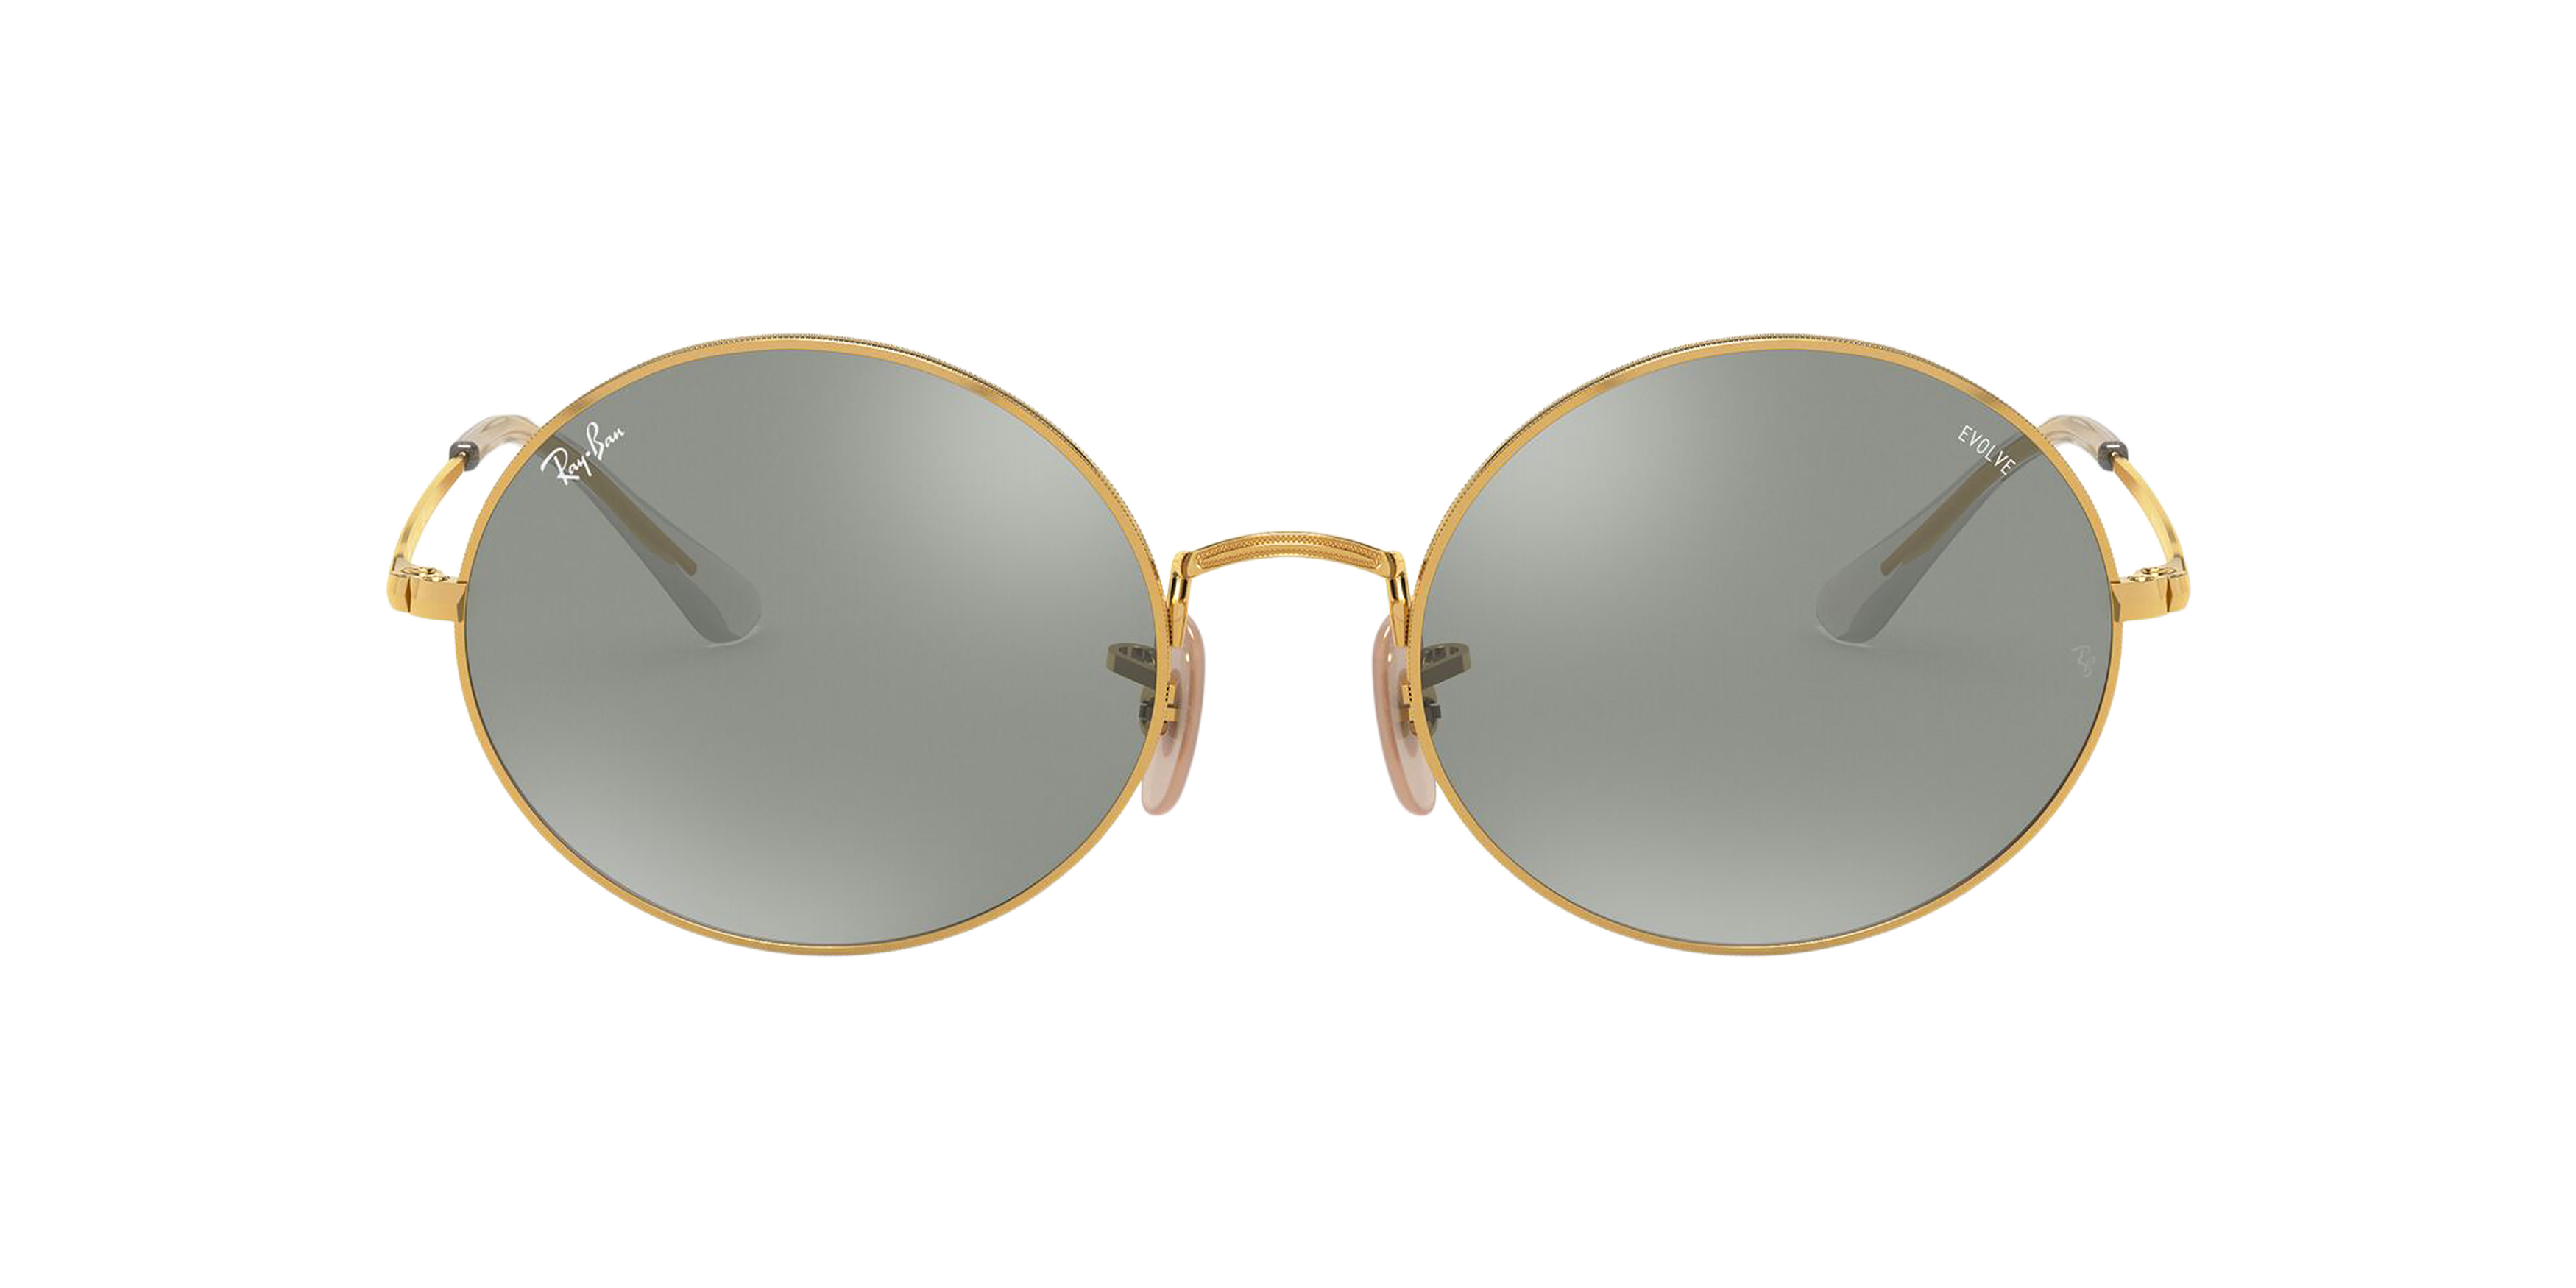 [products.image.front] Ray-Ban Oval 1970 Mirror Evolve RB1970 001/W3